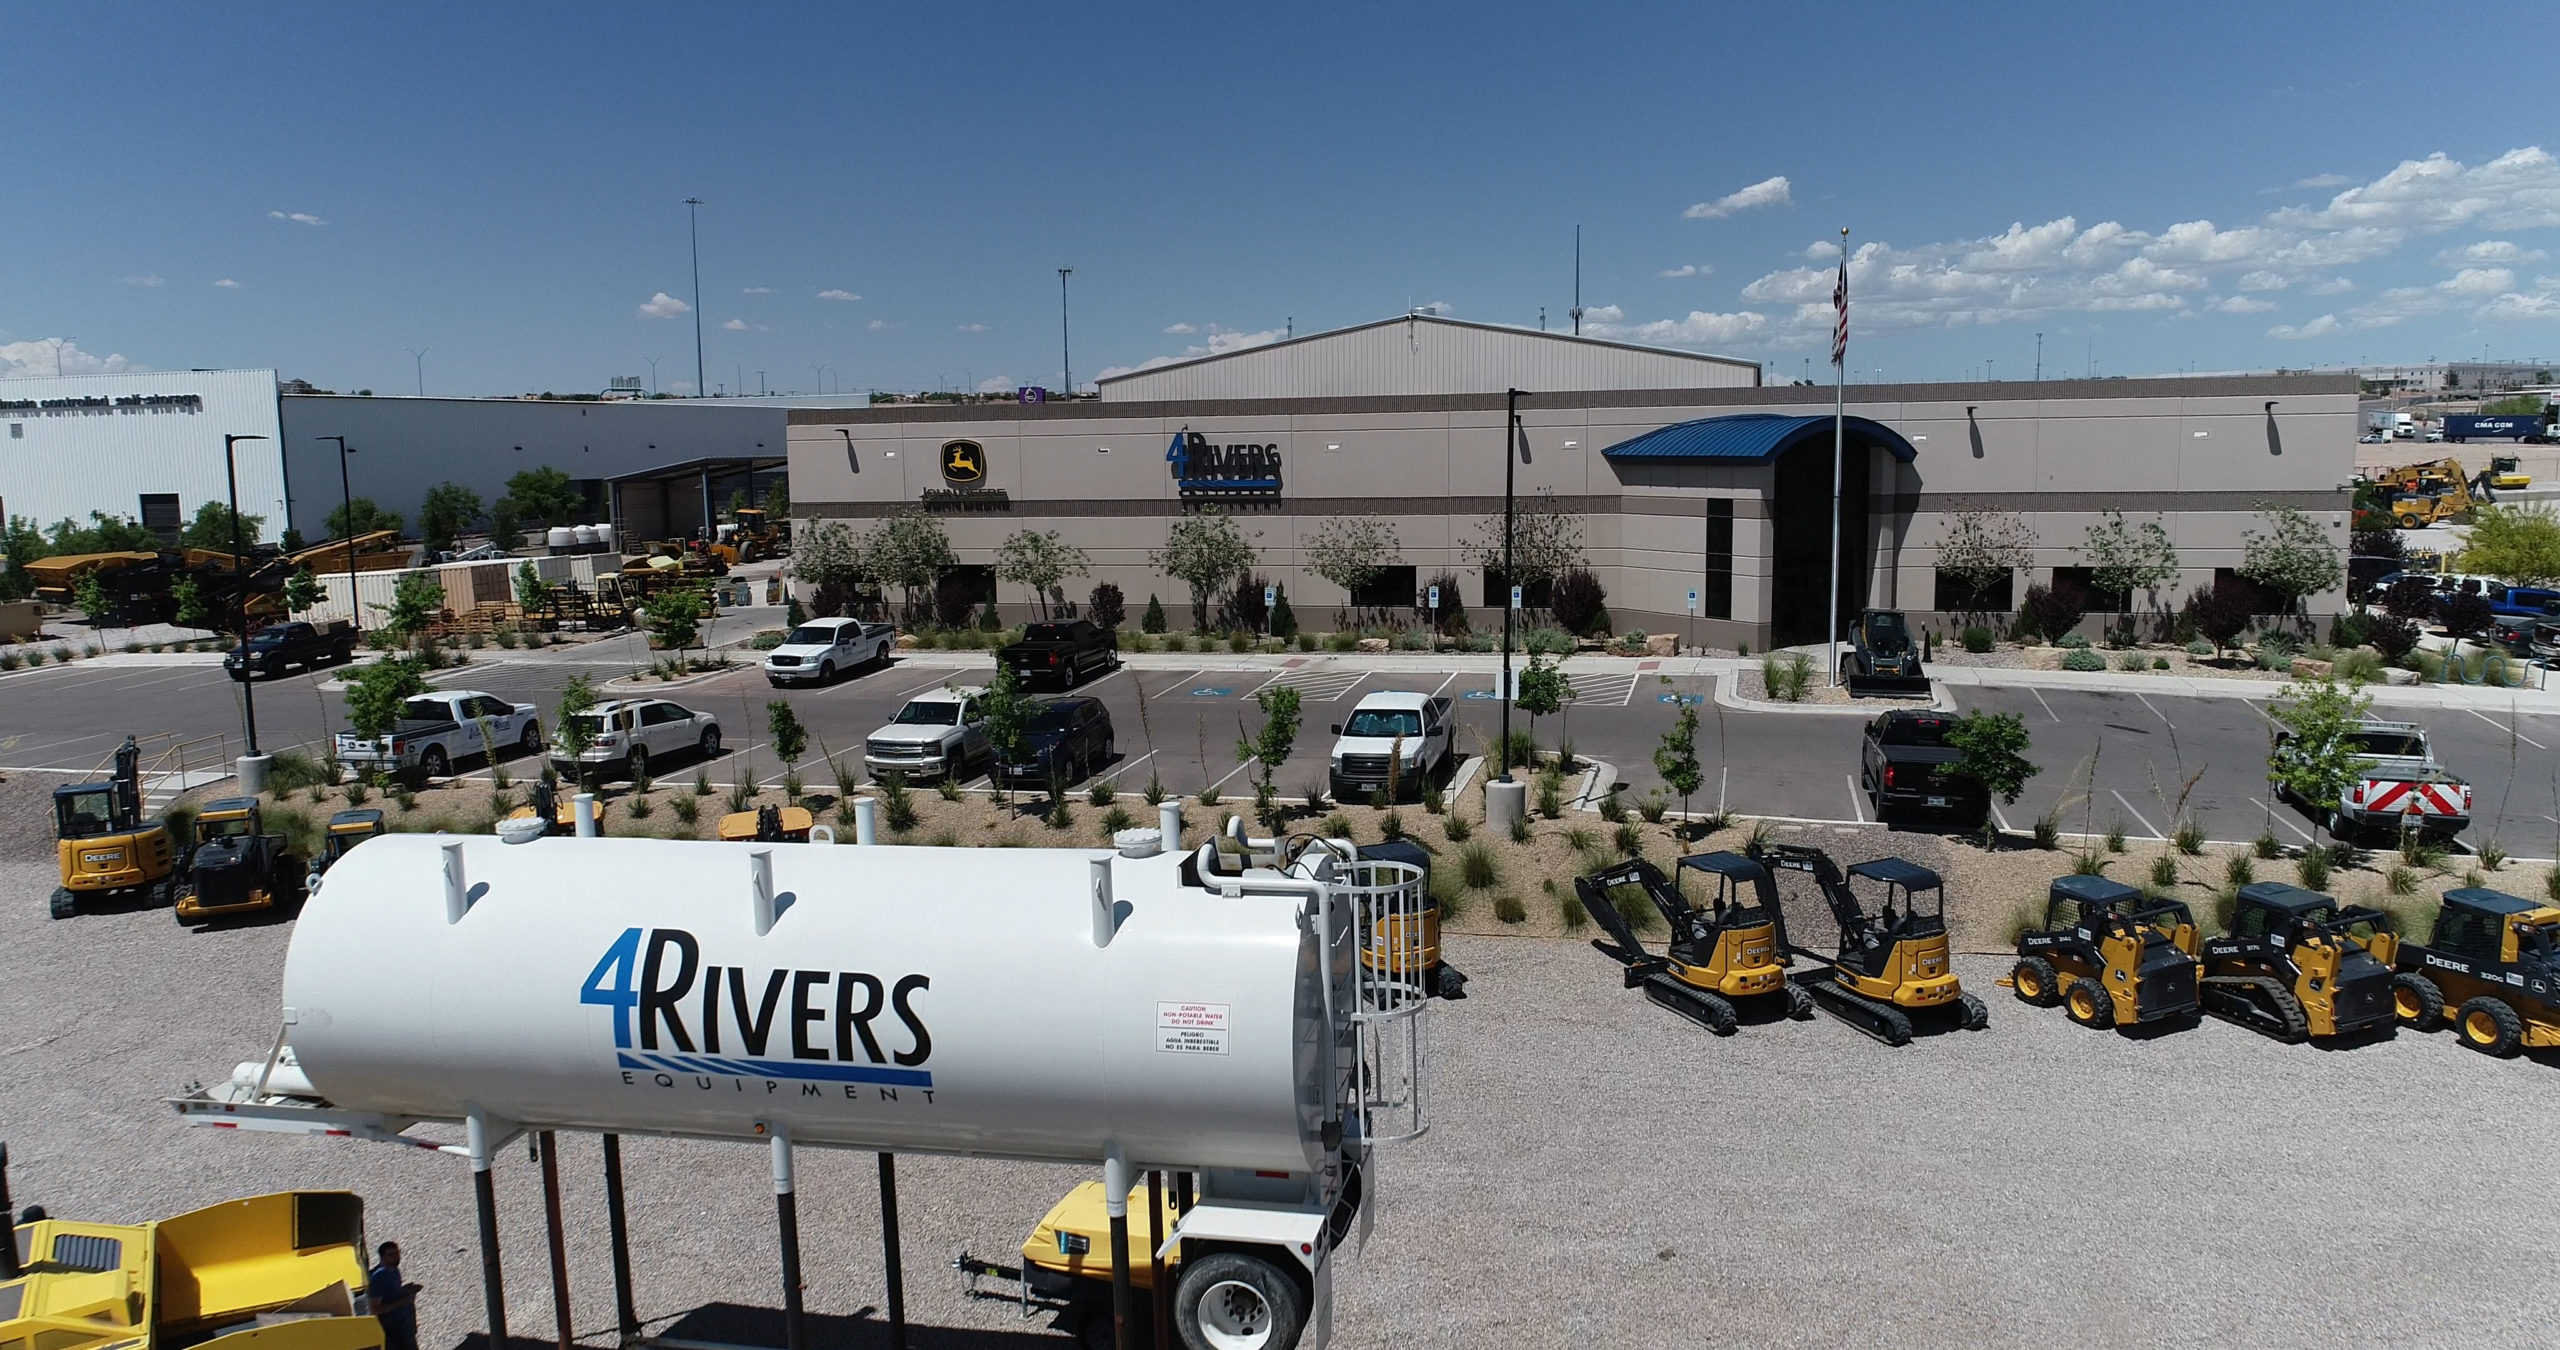 Our 4Rivers Equipment El Paso location provides industry-leading construction equipment support and service.